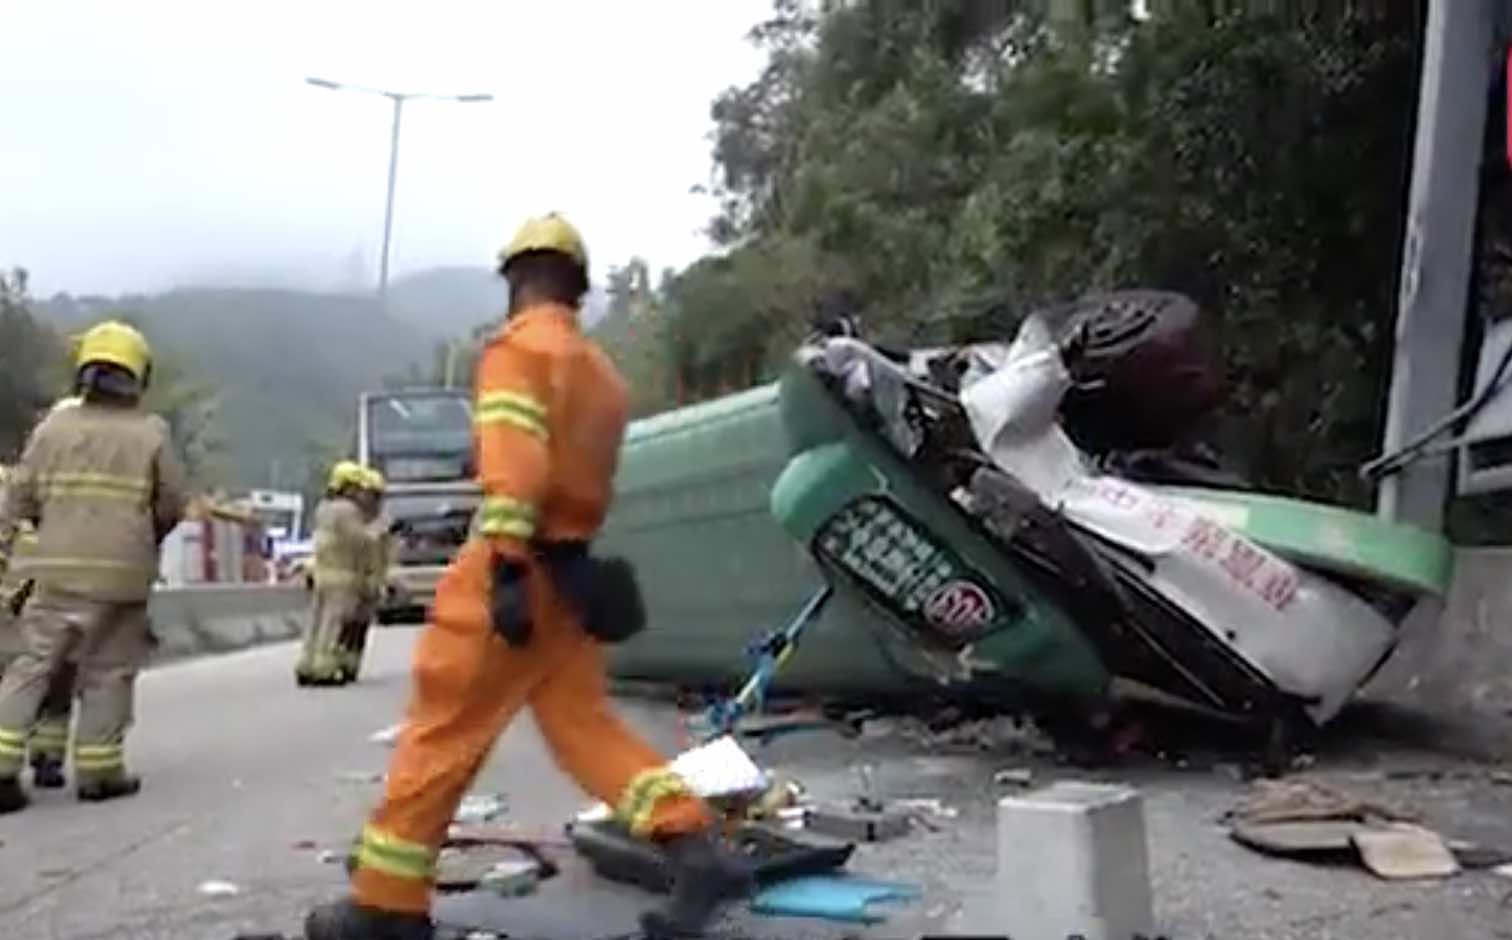 Fire services department investigating the scene of a fatal minibus crash that killed the driver, and injured his 16 passengers. Screengrab via Apple daily video.